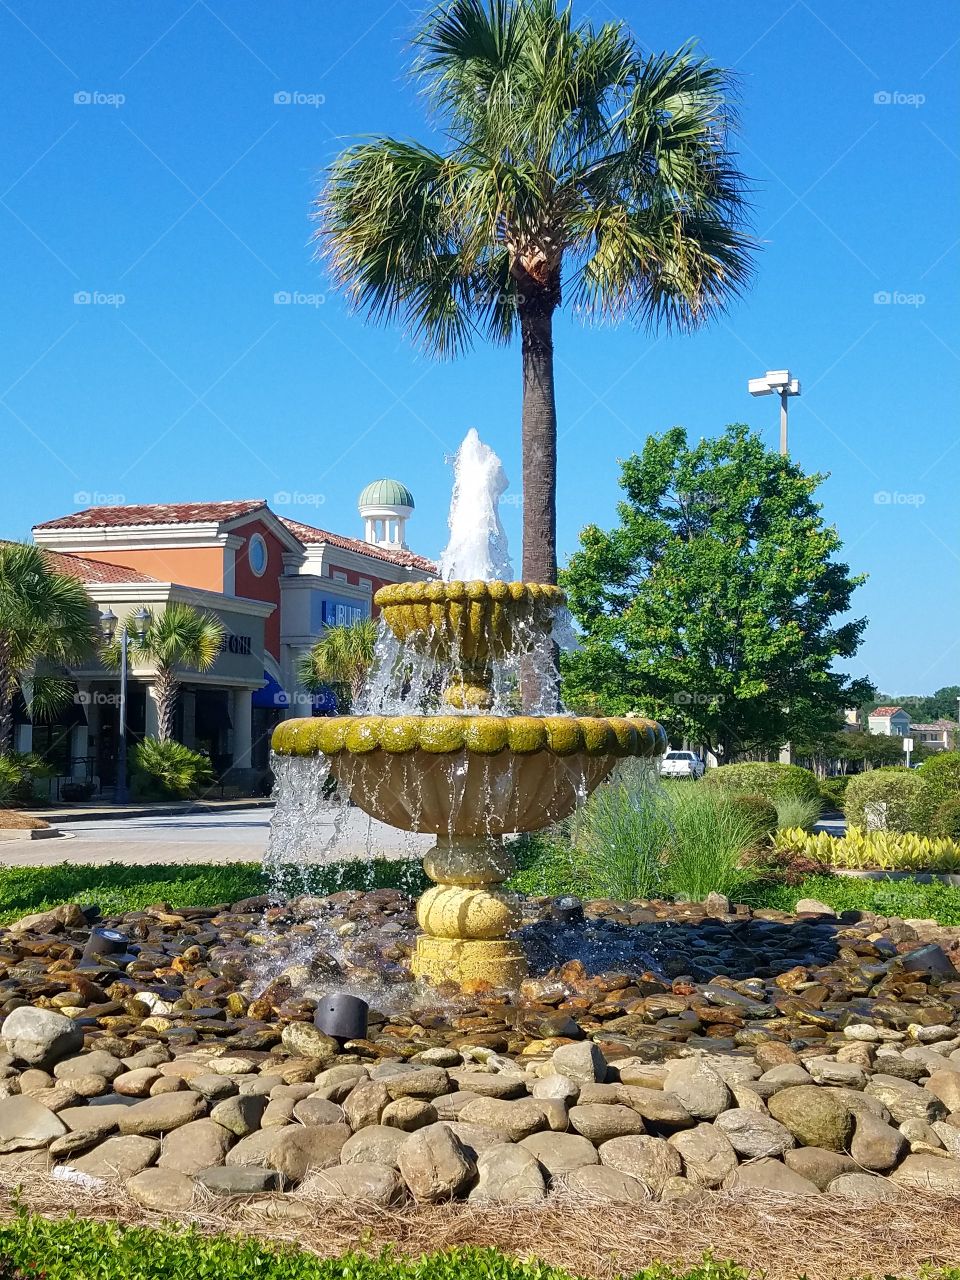 Fountain in the city